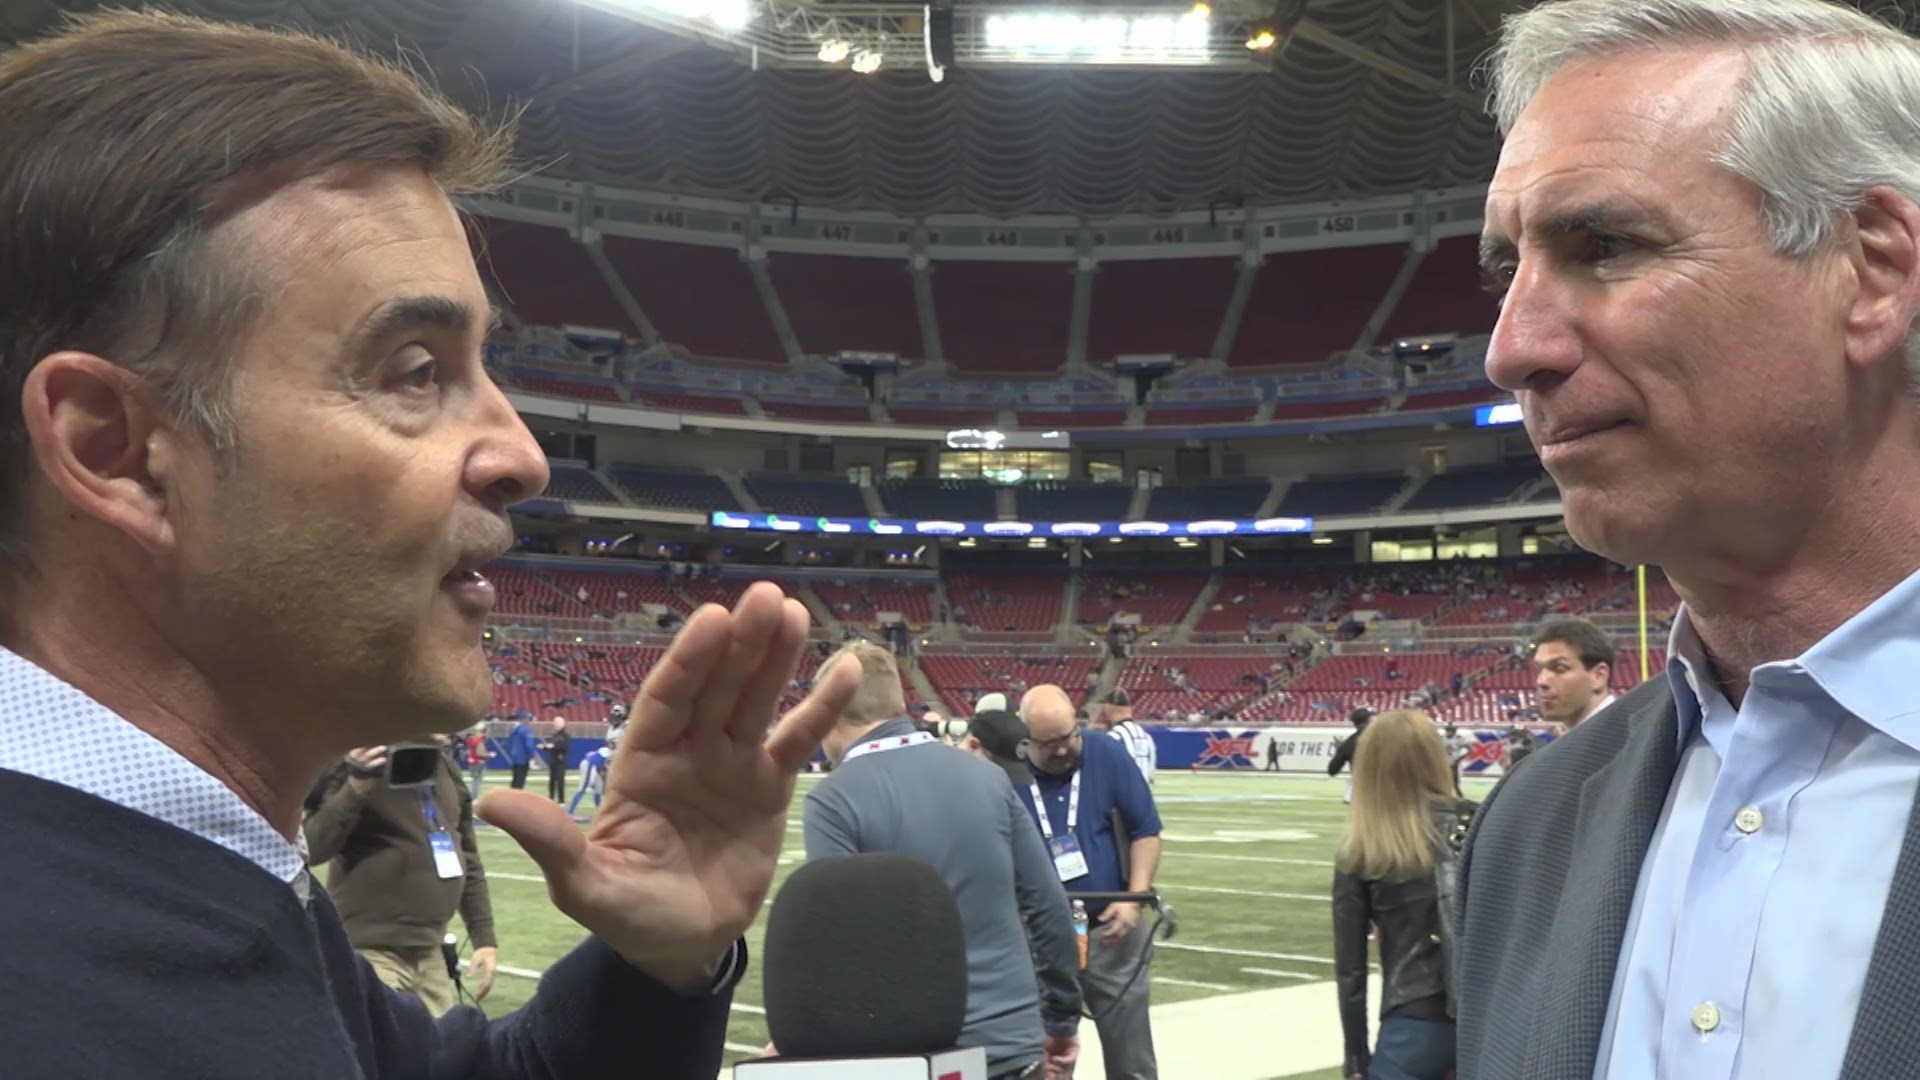 Luck was on hand for the home opener at The Dome, and we caught up with him on the sideline.